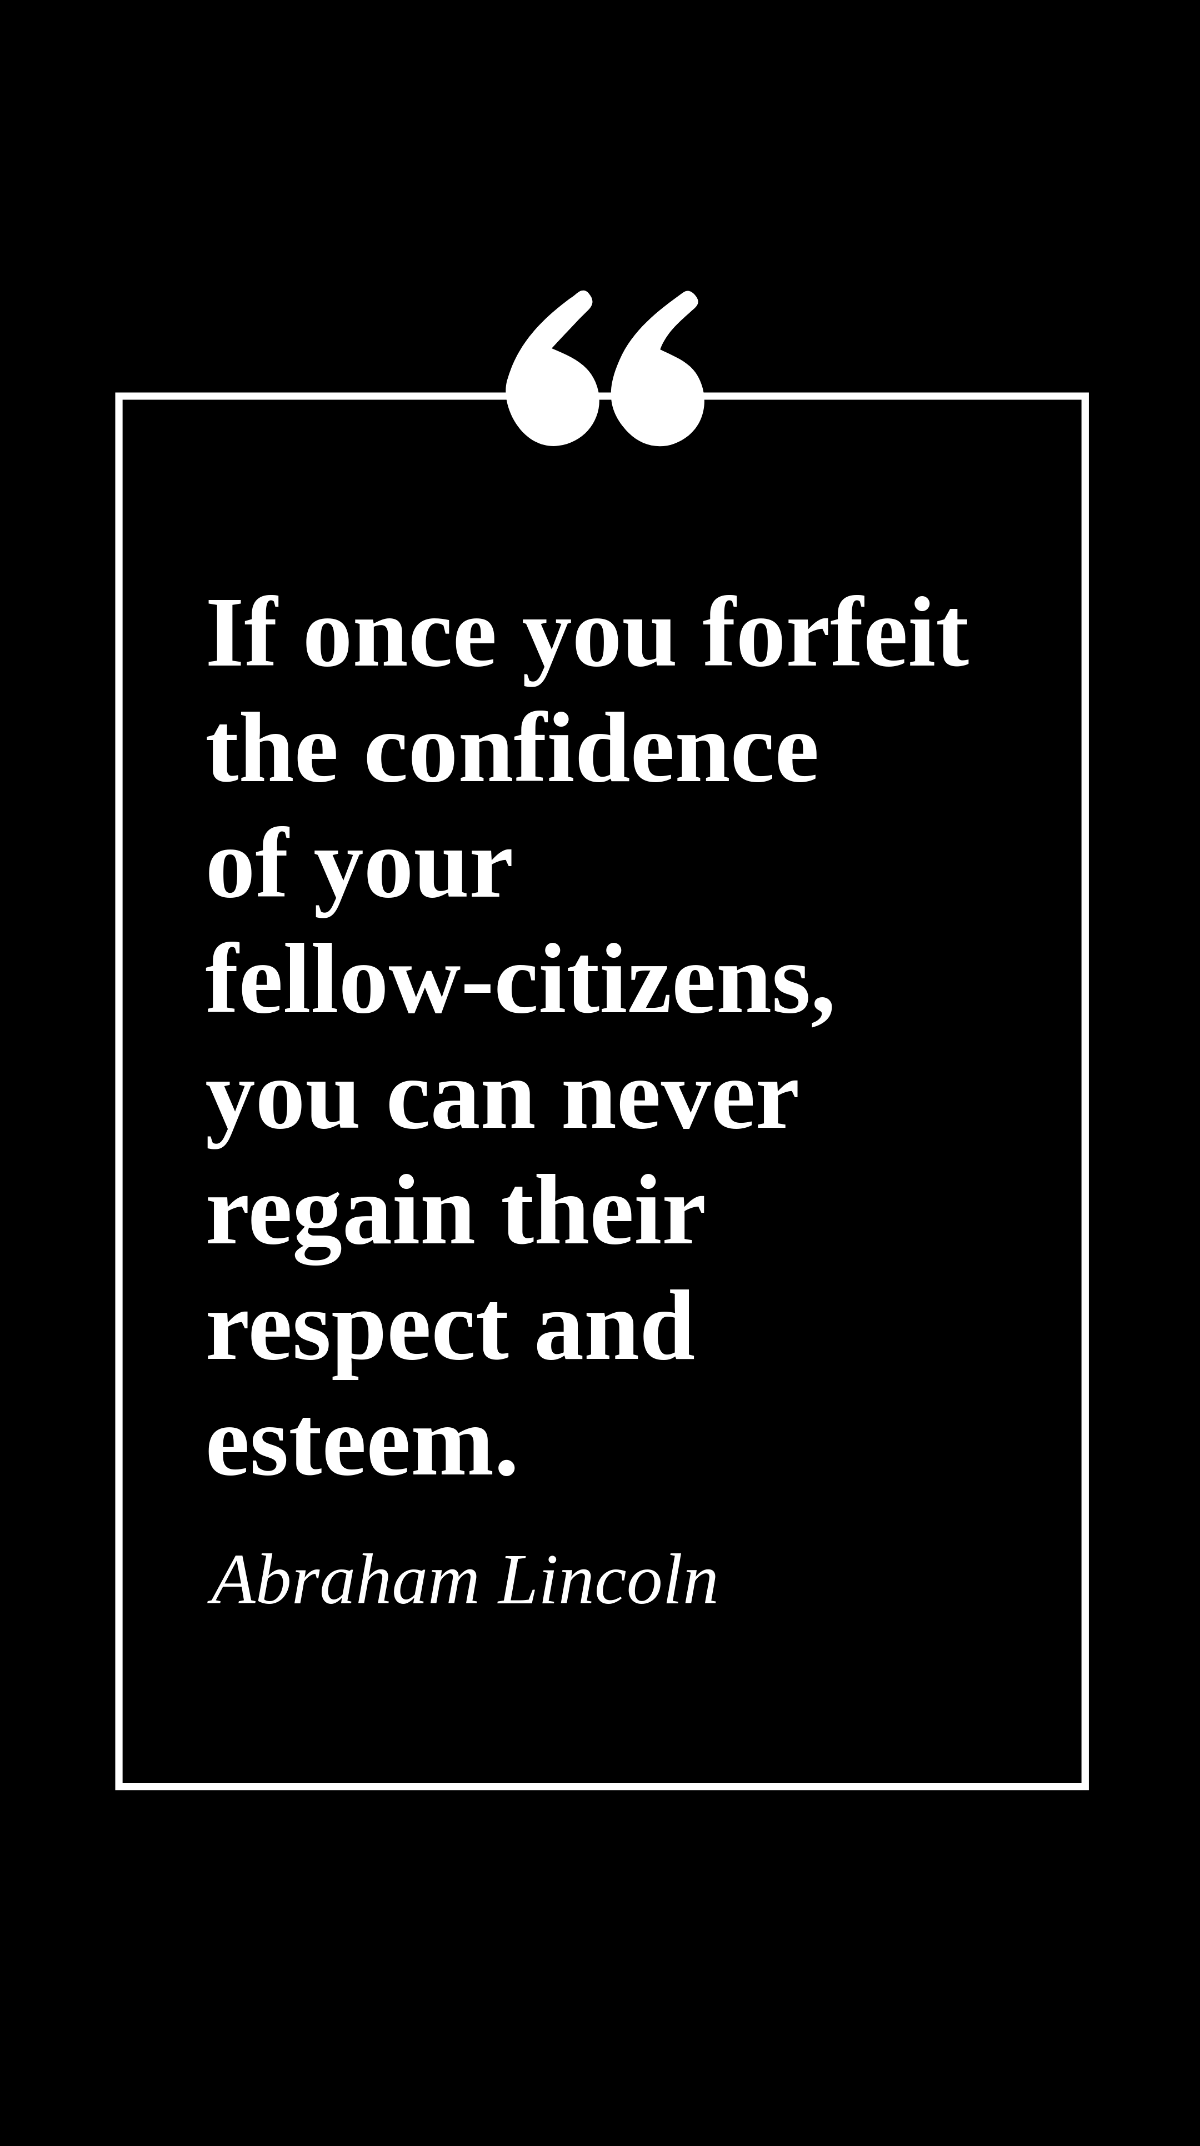 Free Abraham Lincoln - If once you forfeit the confidence of your fellow-citizens, you can never regain their respect and esteem. Template